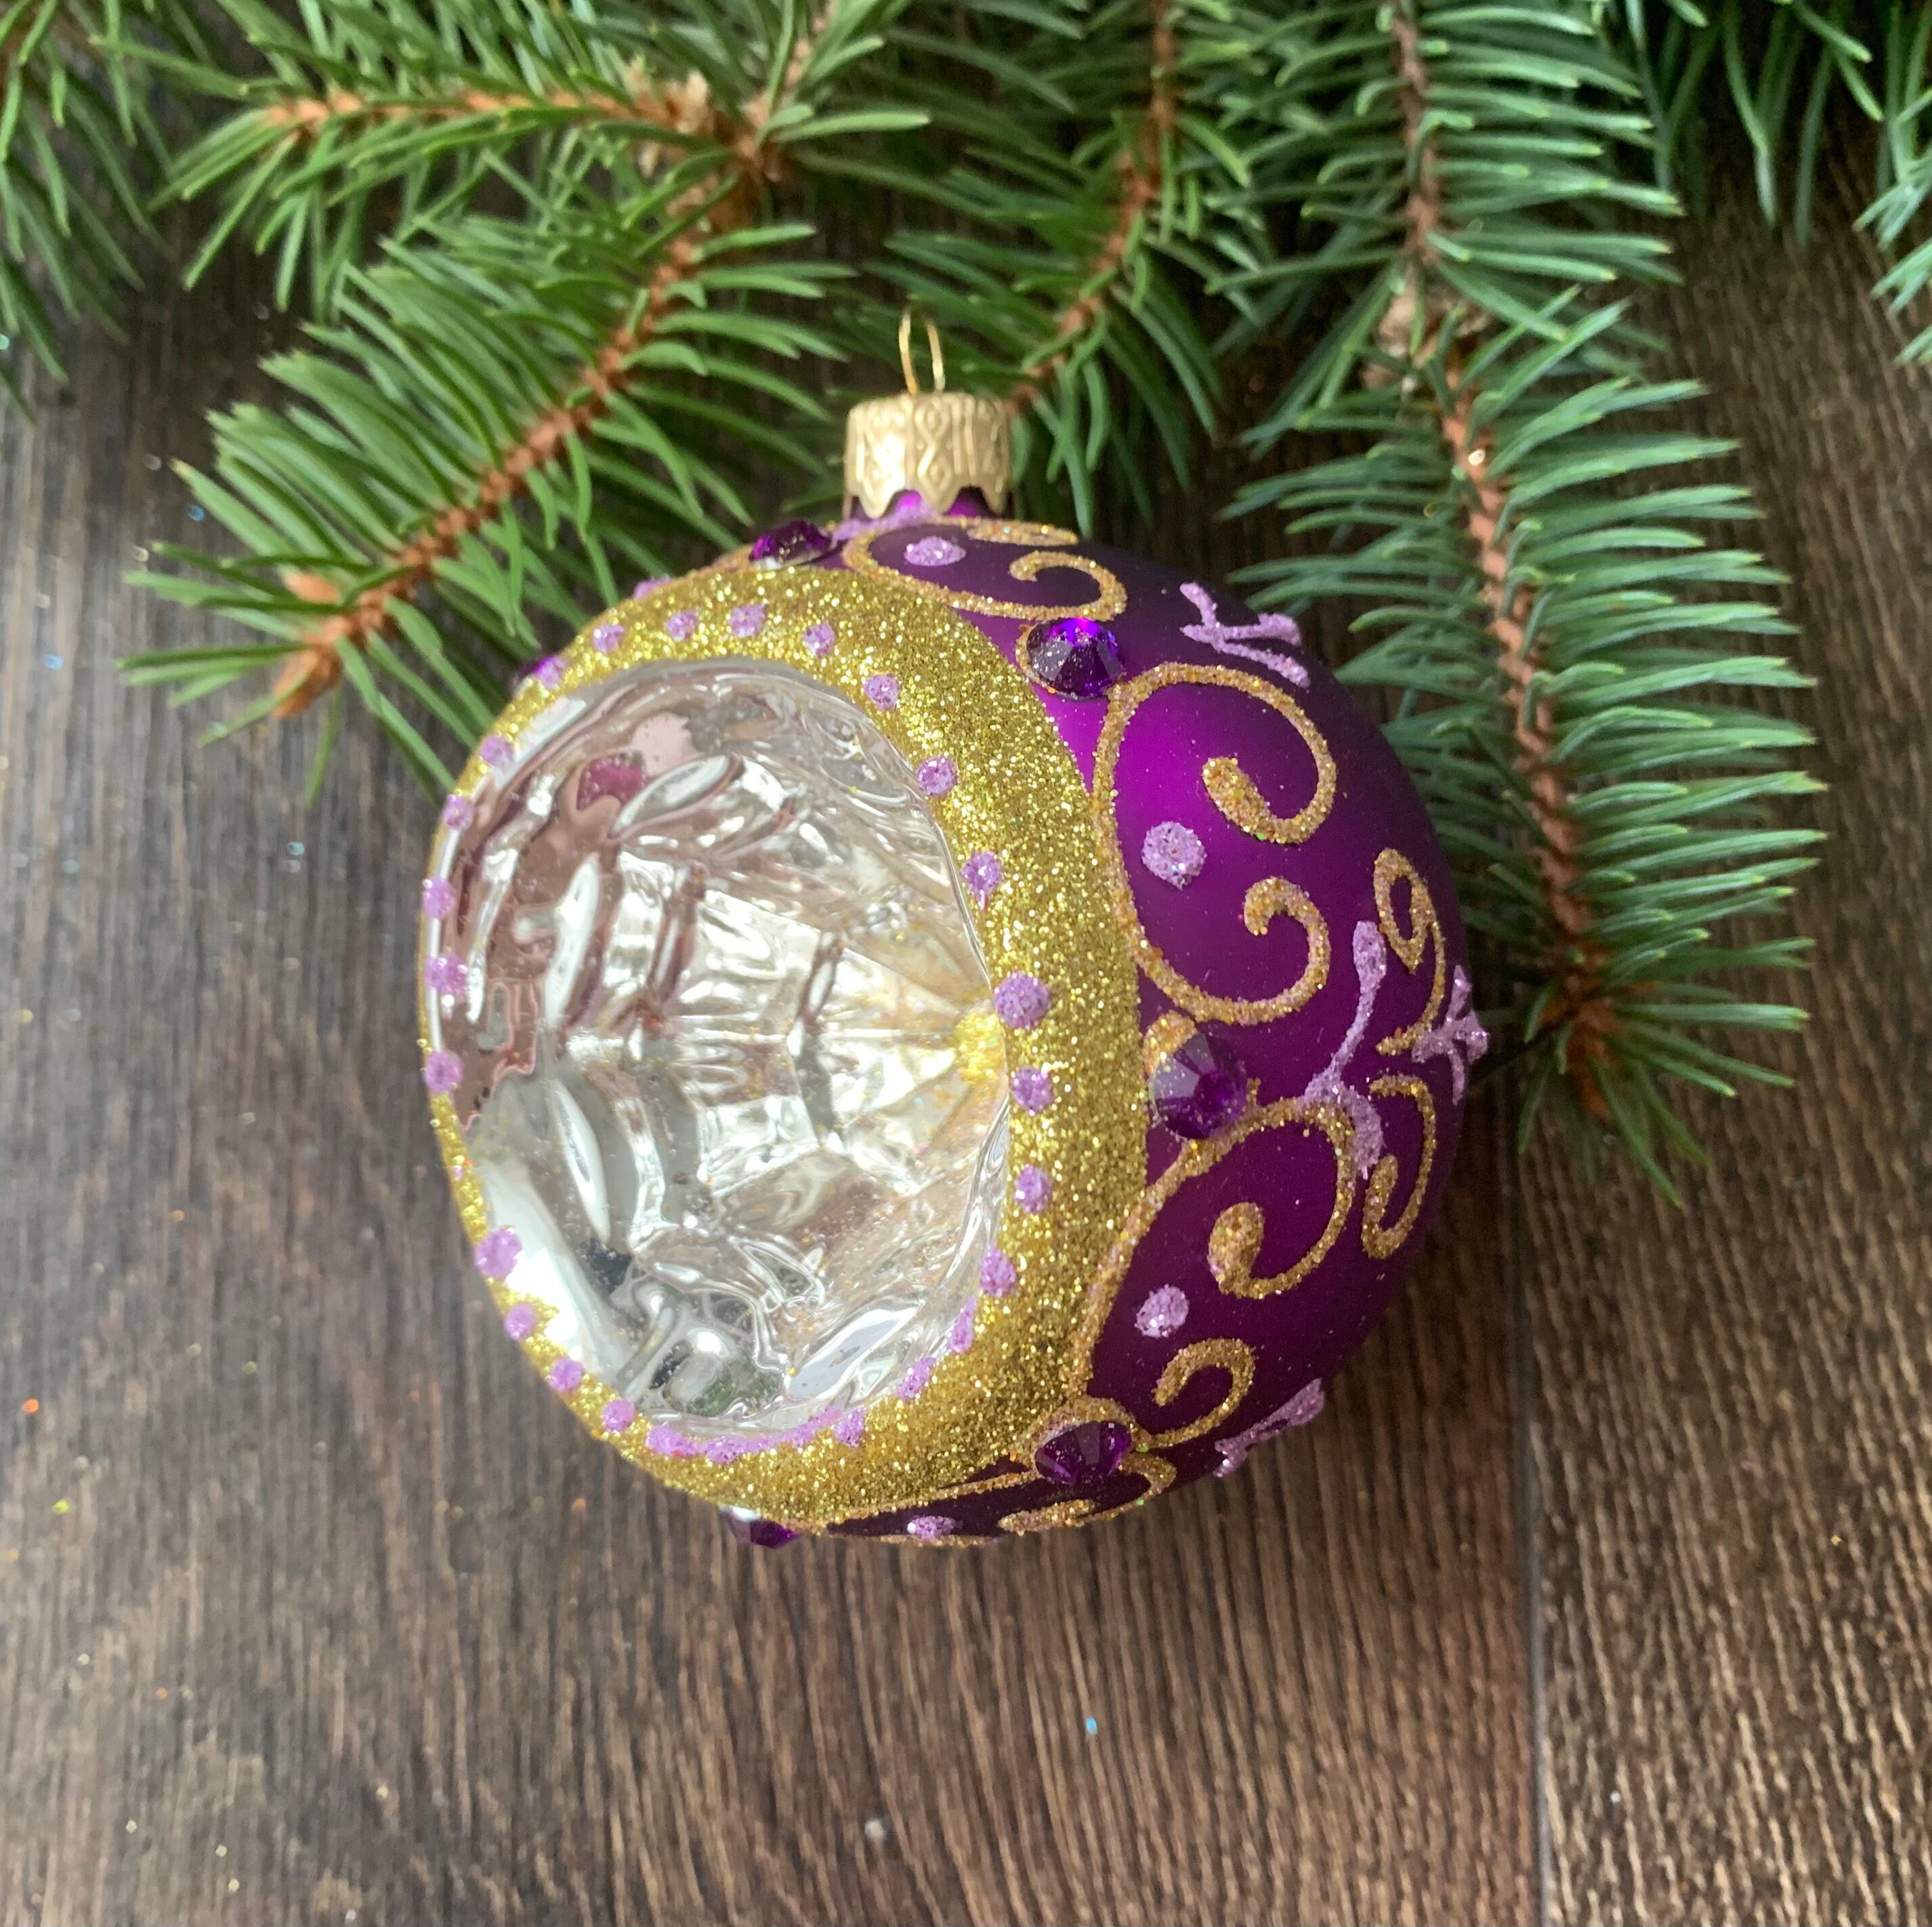 Ornament, glass / enamel / velveteen ribbon / gold-finished copper / brass  / steel, clear and multicolored, 3-inch round with holly design. Sold  individually. - Fire Mountain Gems and Beads